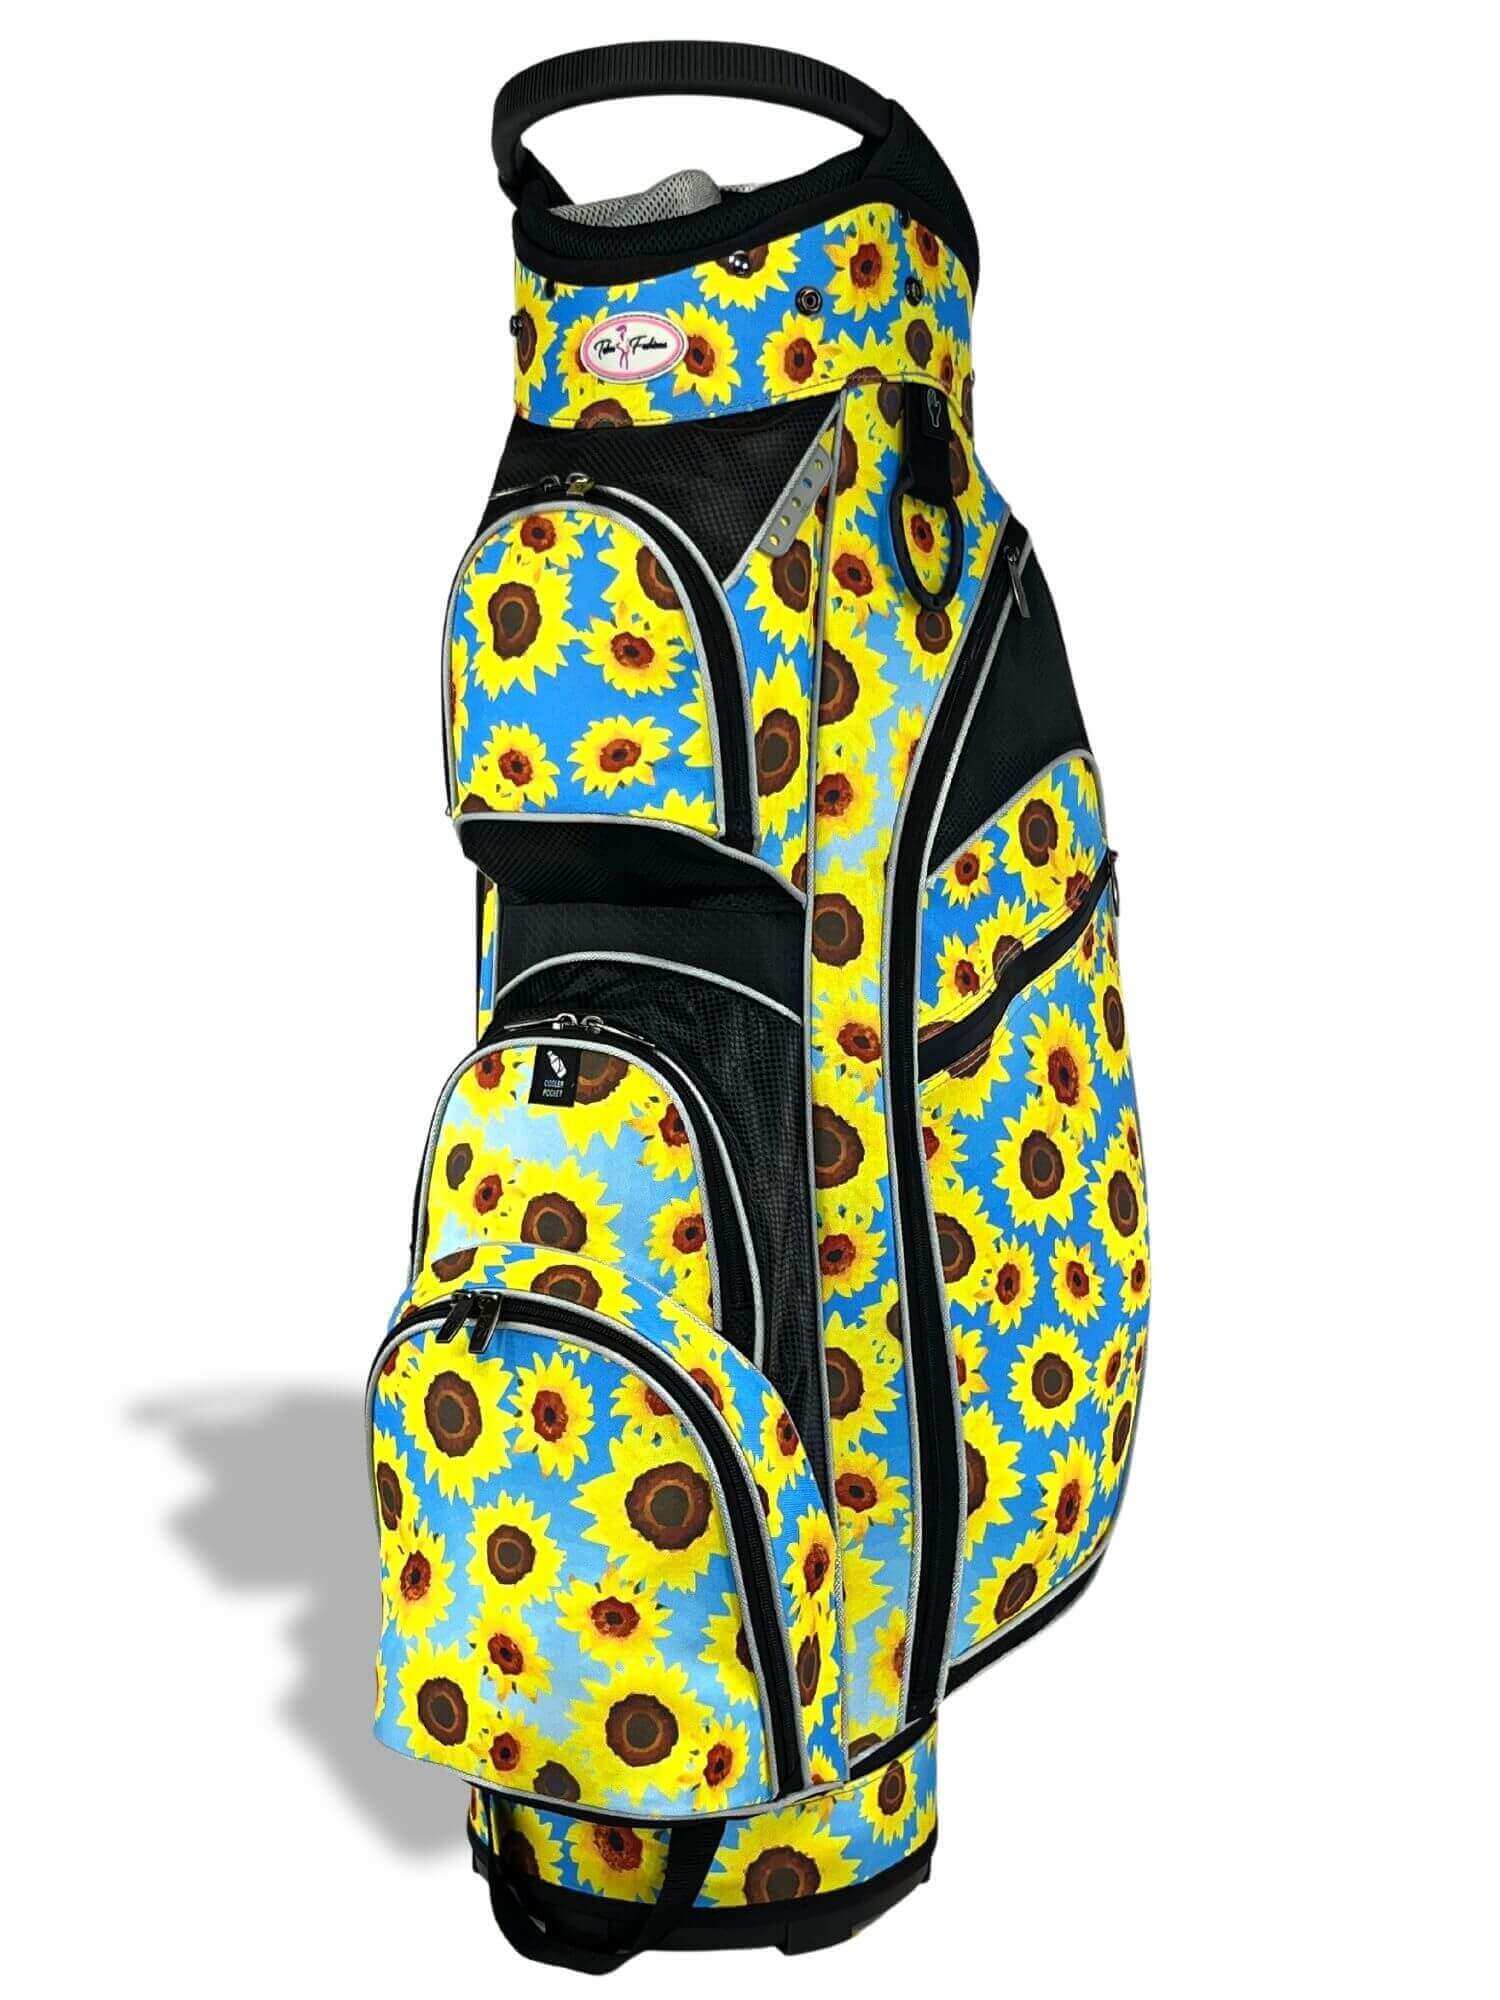 14 Way Designer Women's Golf Cart Bag with Cooler - Sultry Sunflowers